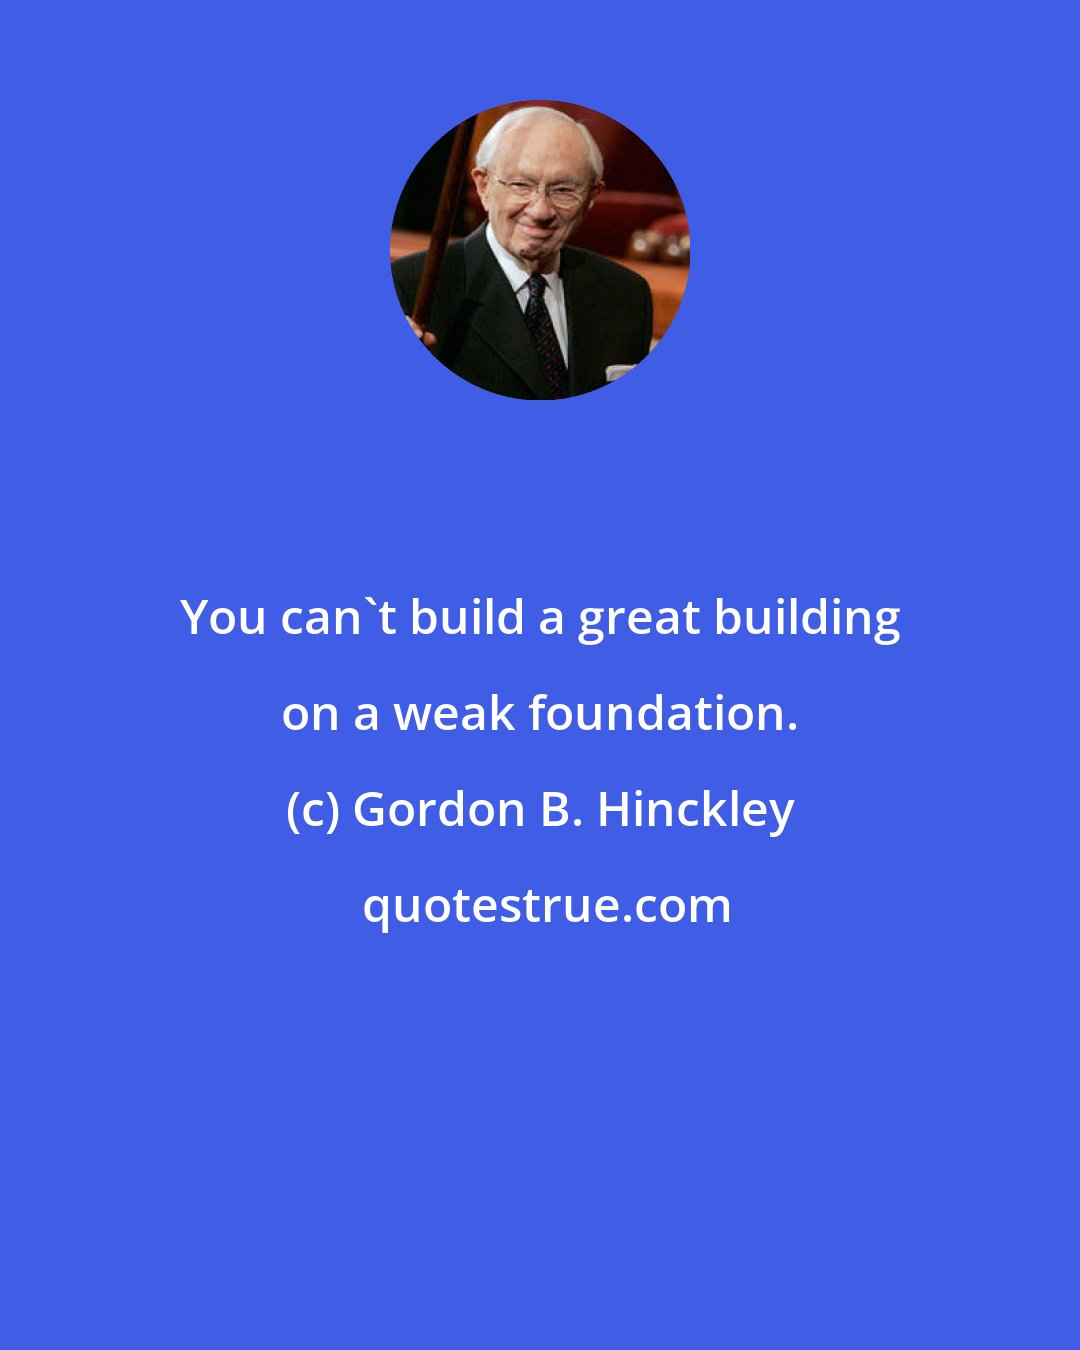 Gordon B. Hinckley: You can't build a great building on a weak foundation.